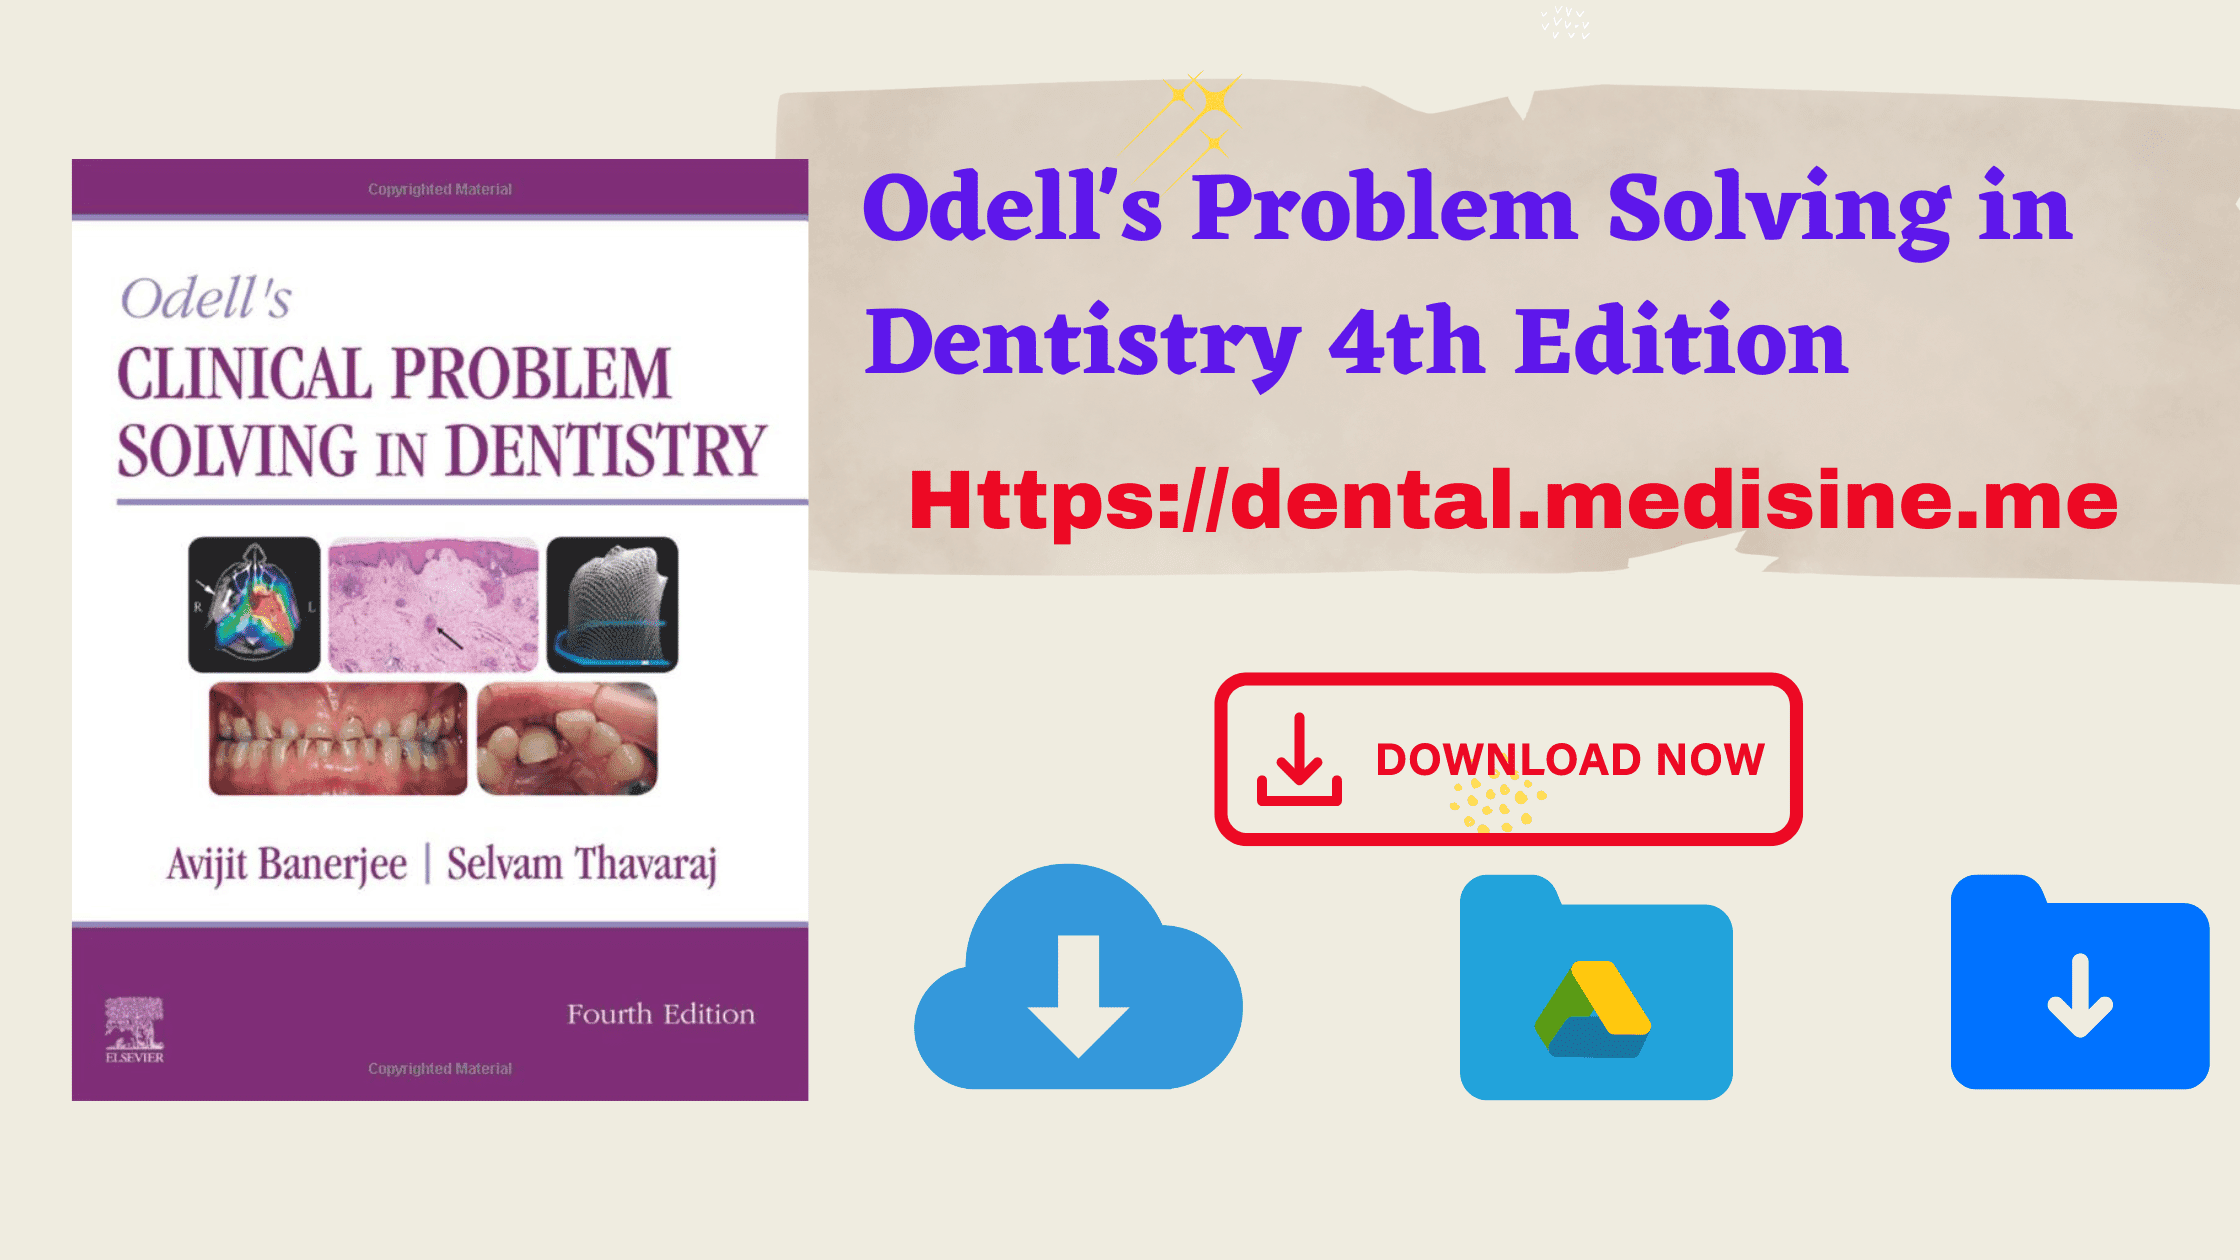 clinical problem solving in dentistry 4th edition pdf